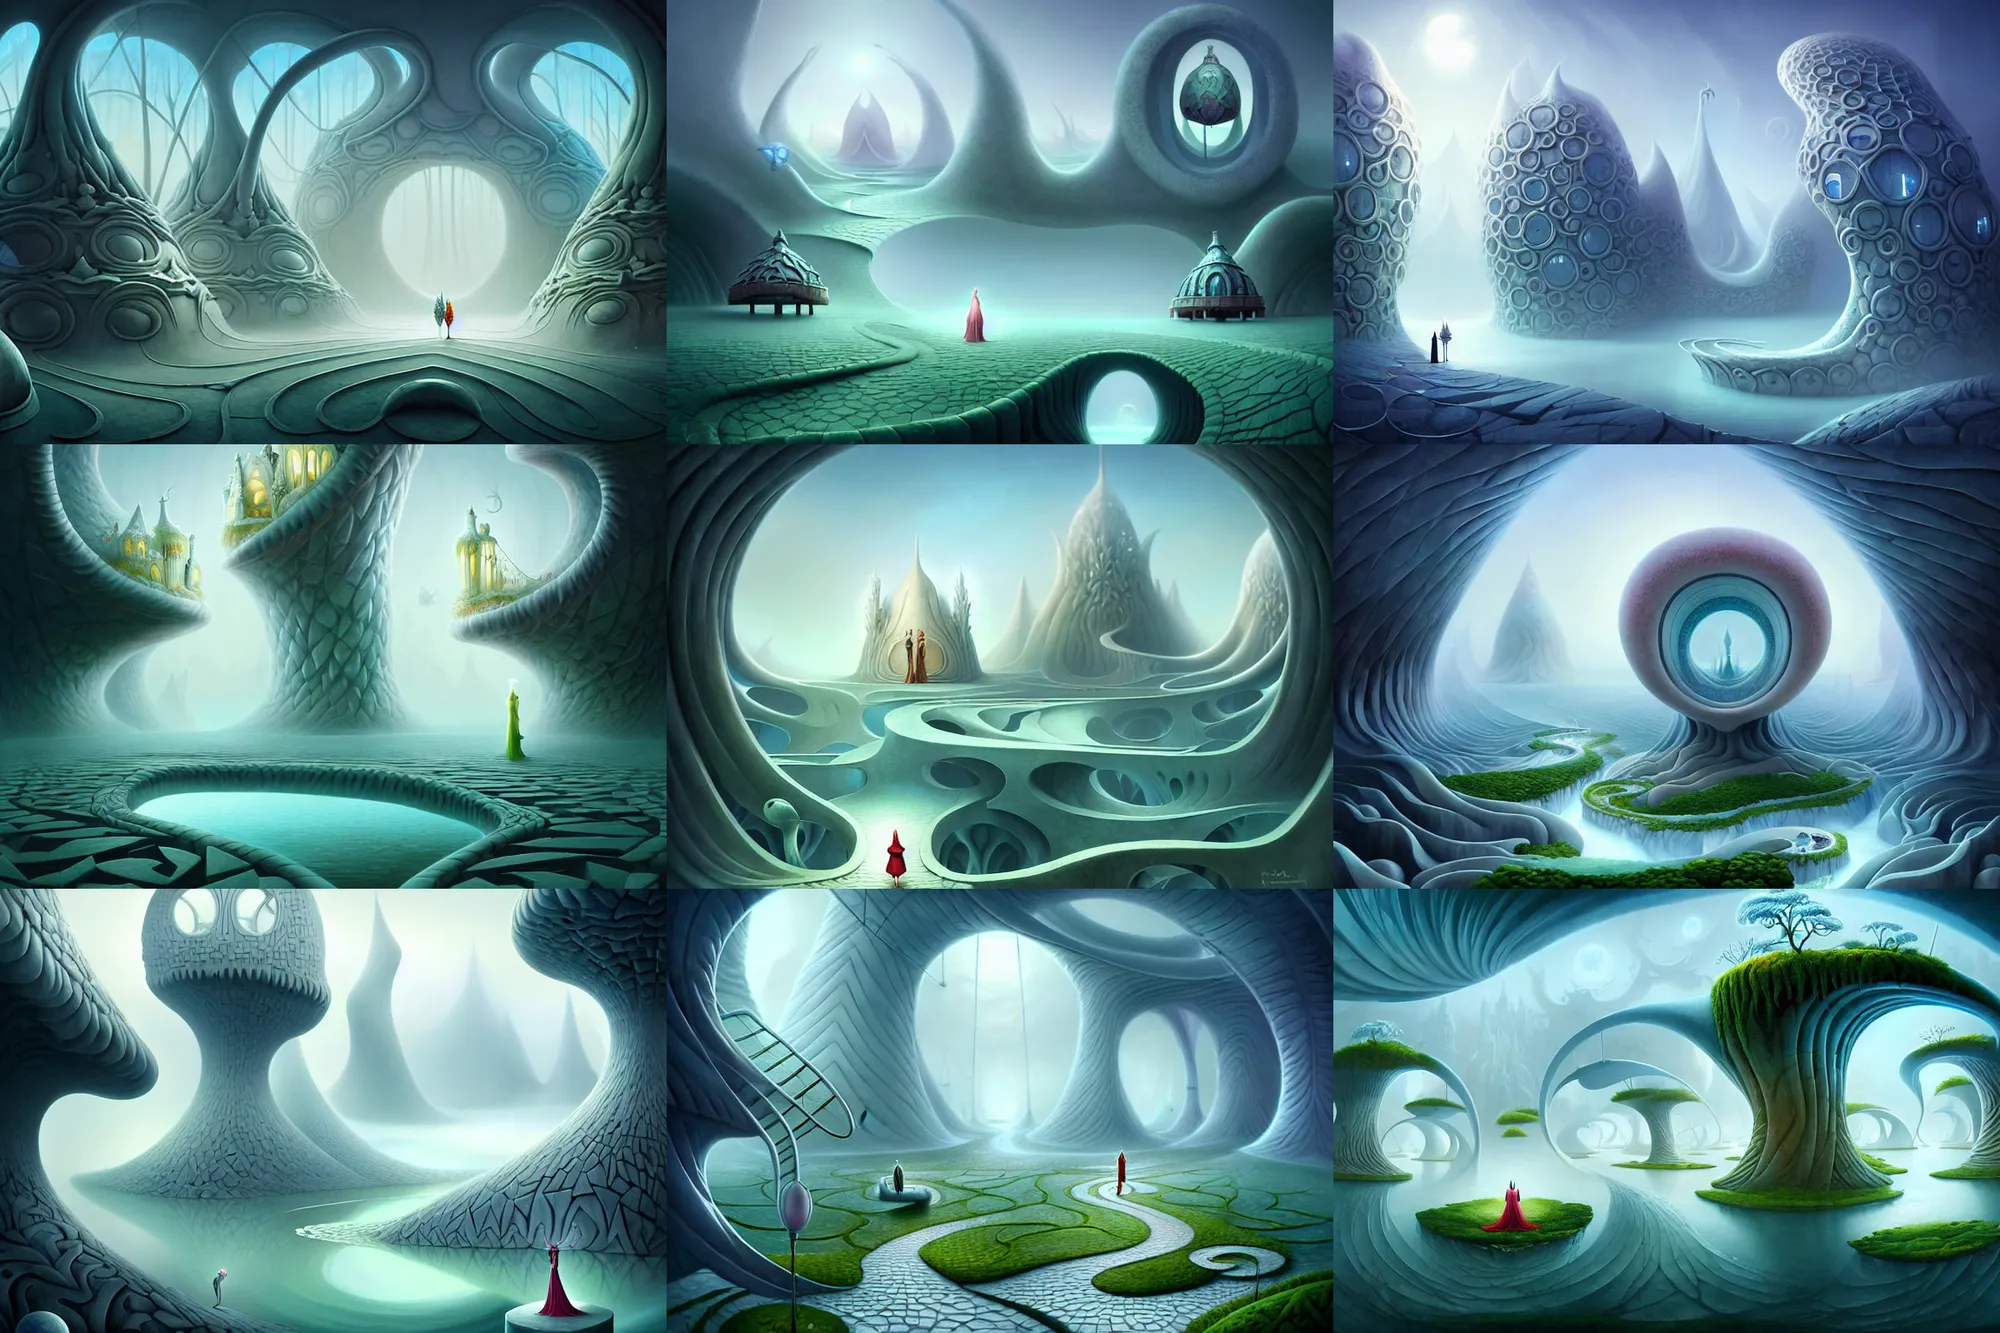 Prompt: a beguiling fantasy matte painting of an impossible path winding through arctic dream worlds with surreal architecture designed by heironymous bosch, structures inspired by heironymous bosch's garden of earthly delights, surreal ice interiors by cyril rolando and asher durand and natalie shau, insanely detailed, whimsical, intricate